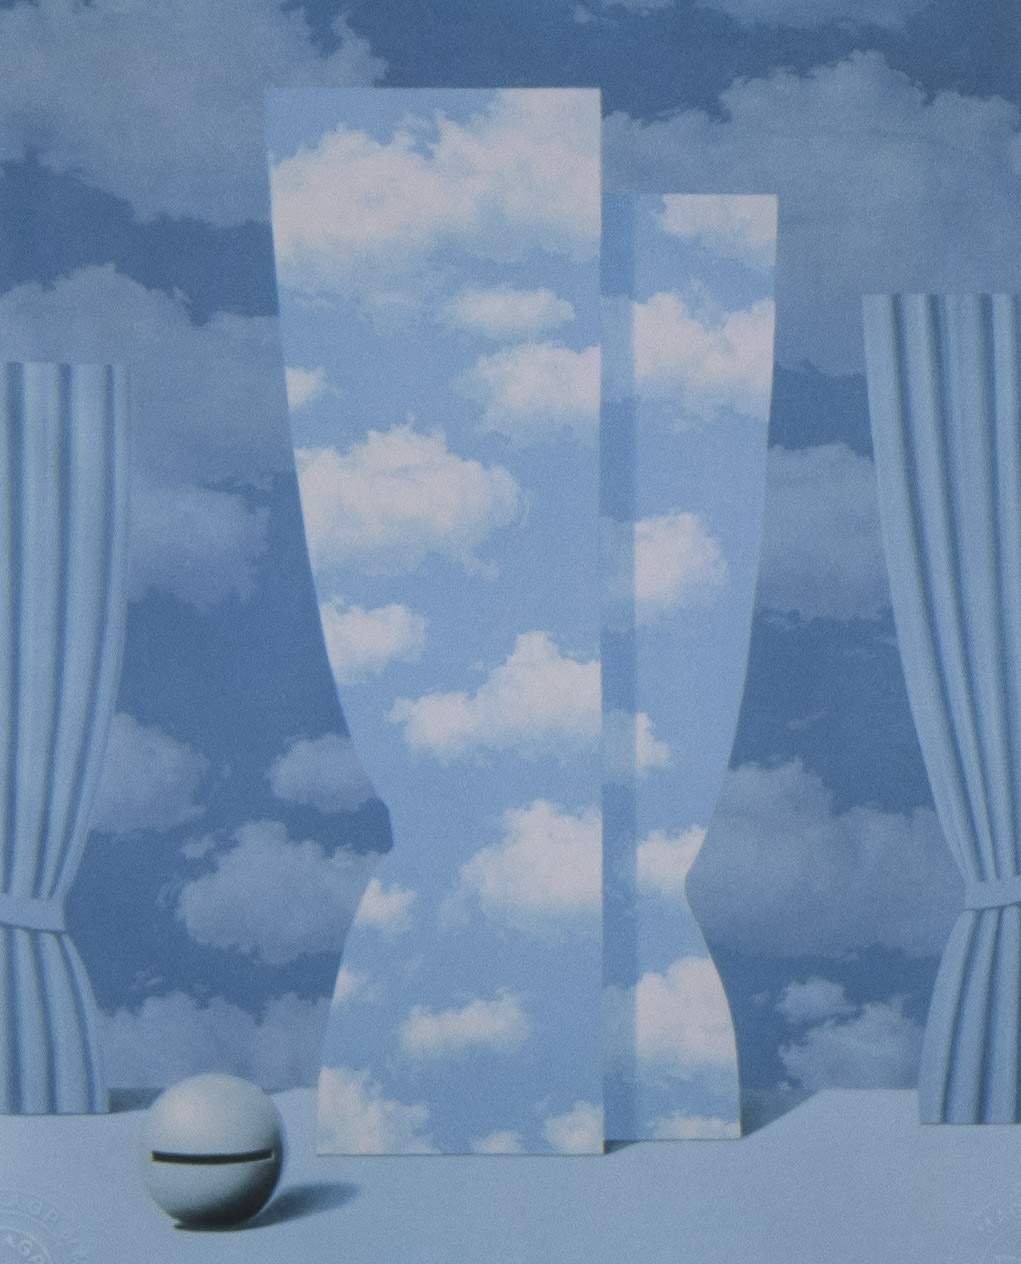 René MAGRITTE (1898-1967), lithograph after a 1962 work 'La peine perdue', numbered 11/300 and beari